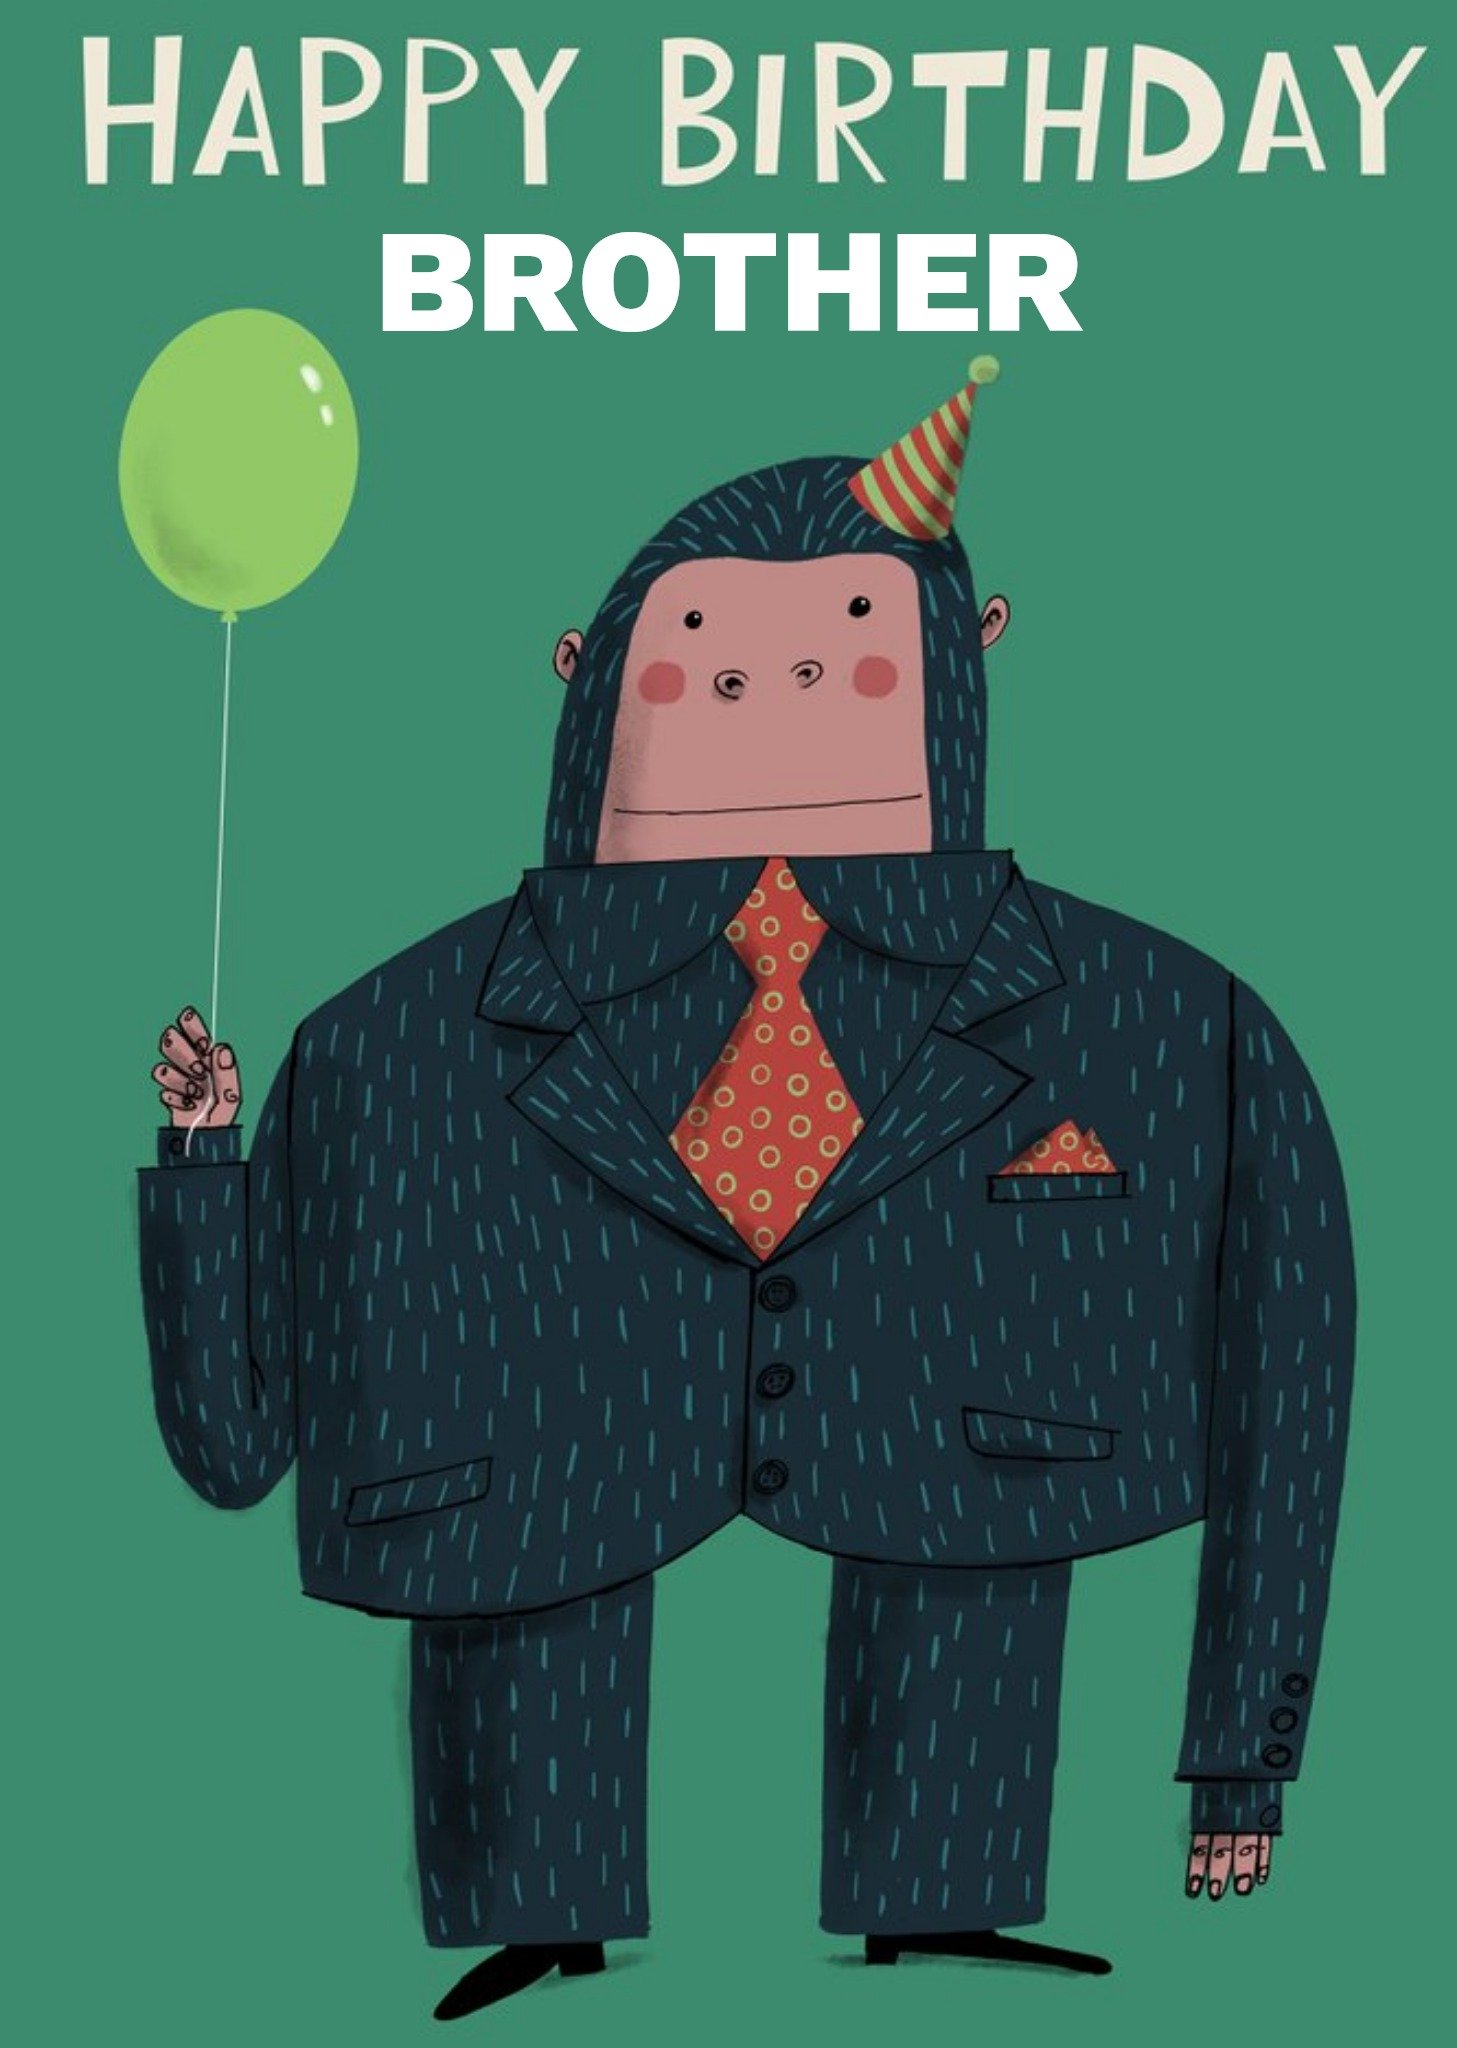 Moonpig Gorilla In A Suit Holding A Balloon Personalise Brother Birthday Card, Large